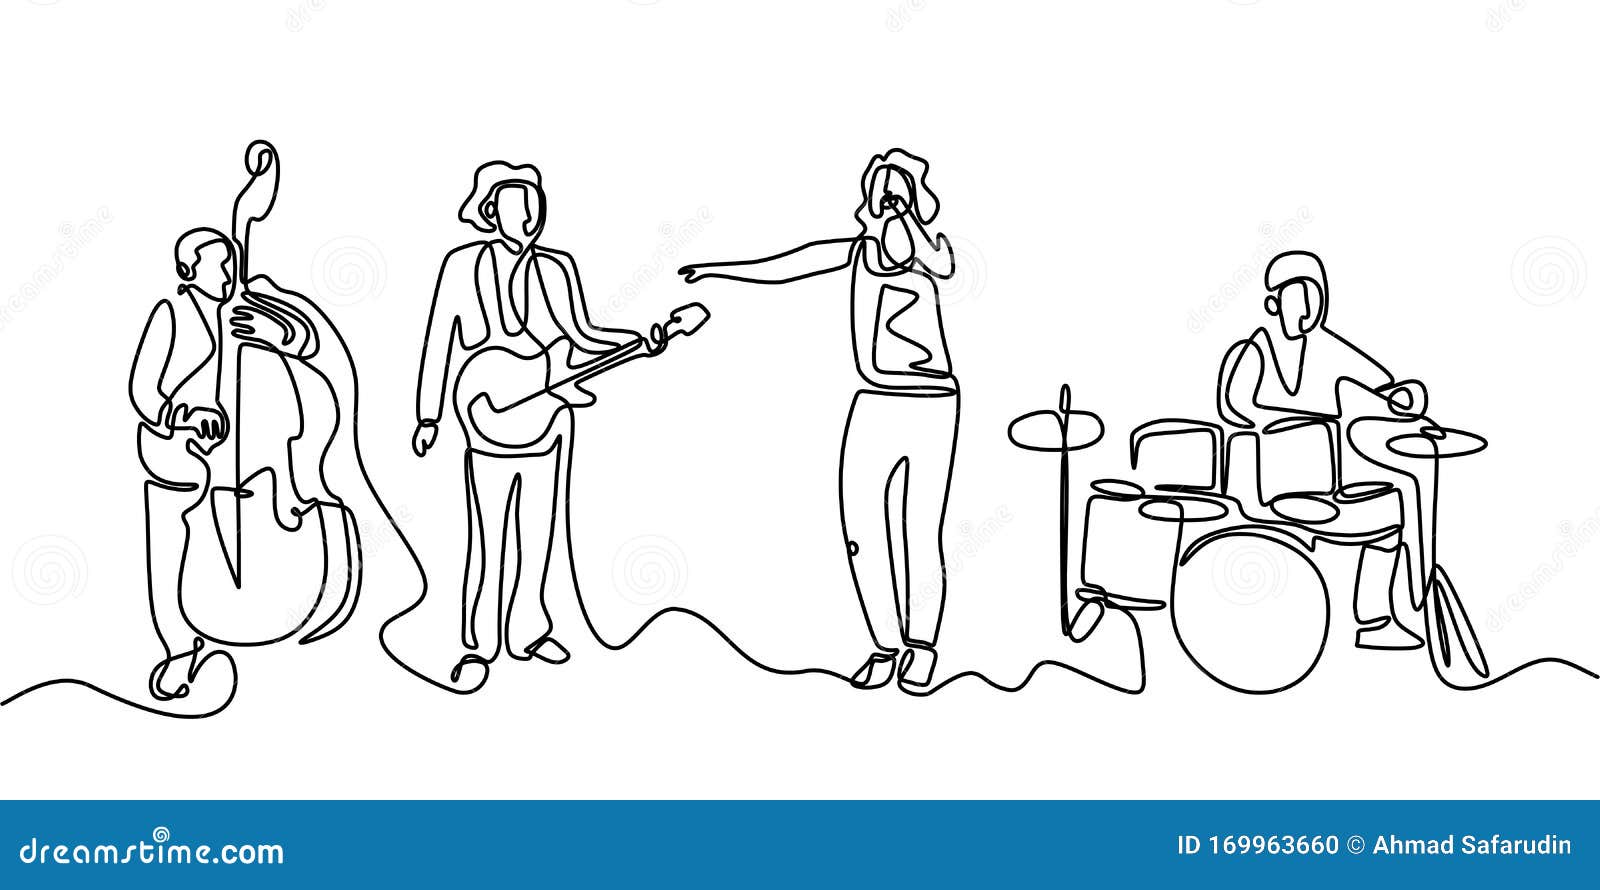 Image Details IST_31178_05670 - Jazz, music, band, concert, saxophone  concept. Hand drawn jazz band performing on scene concept sketch. Isolated  vector illustration.. Jazz, music, band, concert, saxophone concept. Hand  drawn isolated vector.